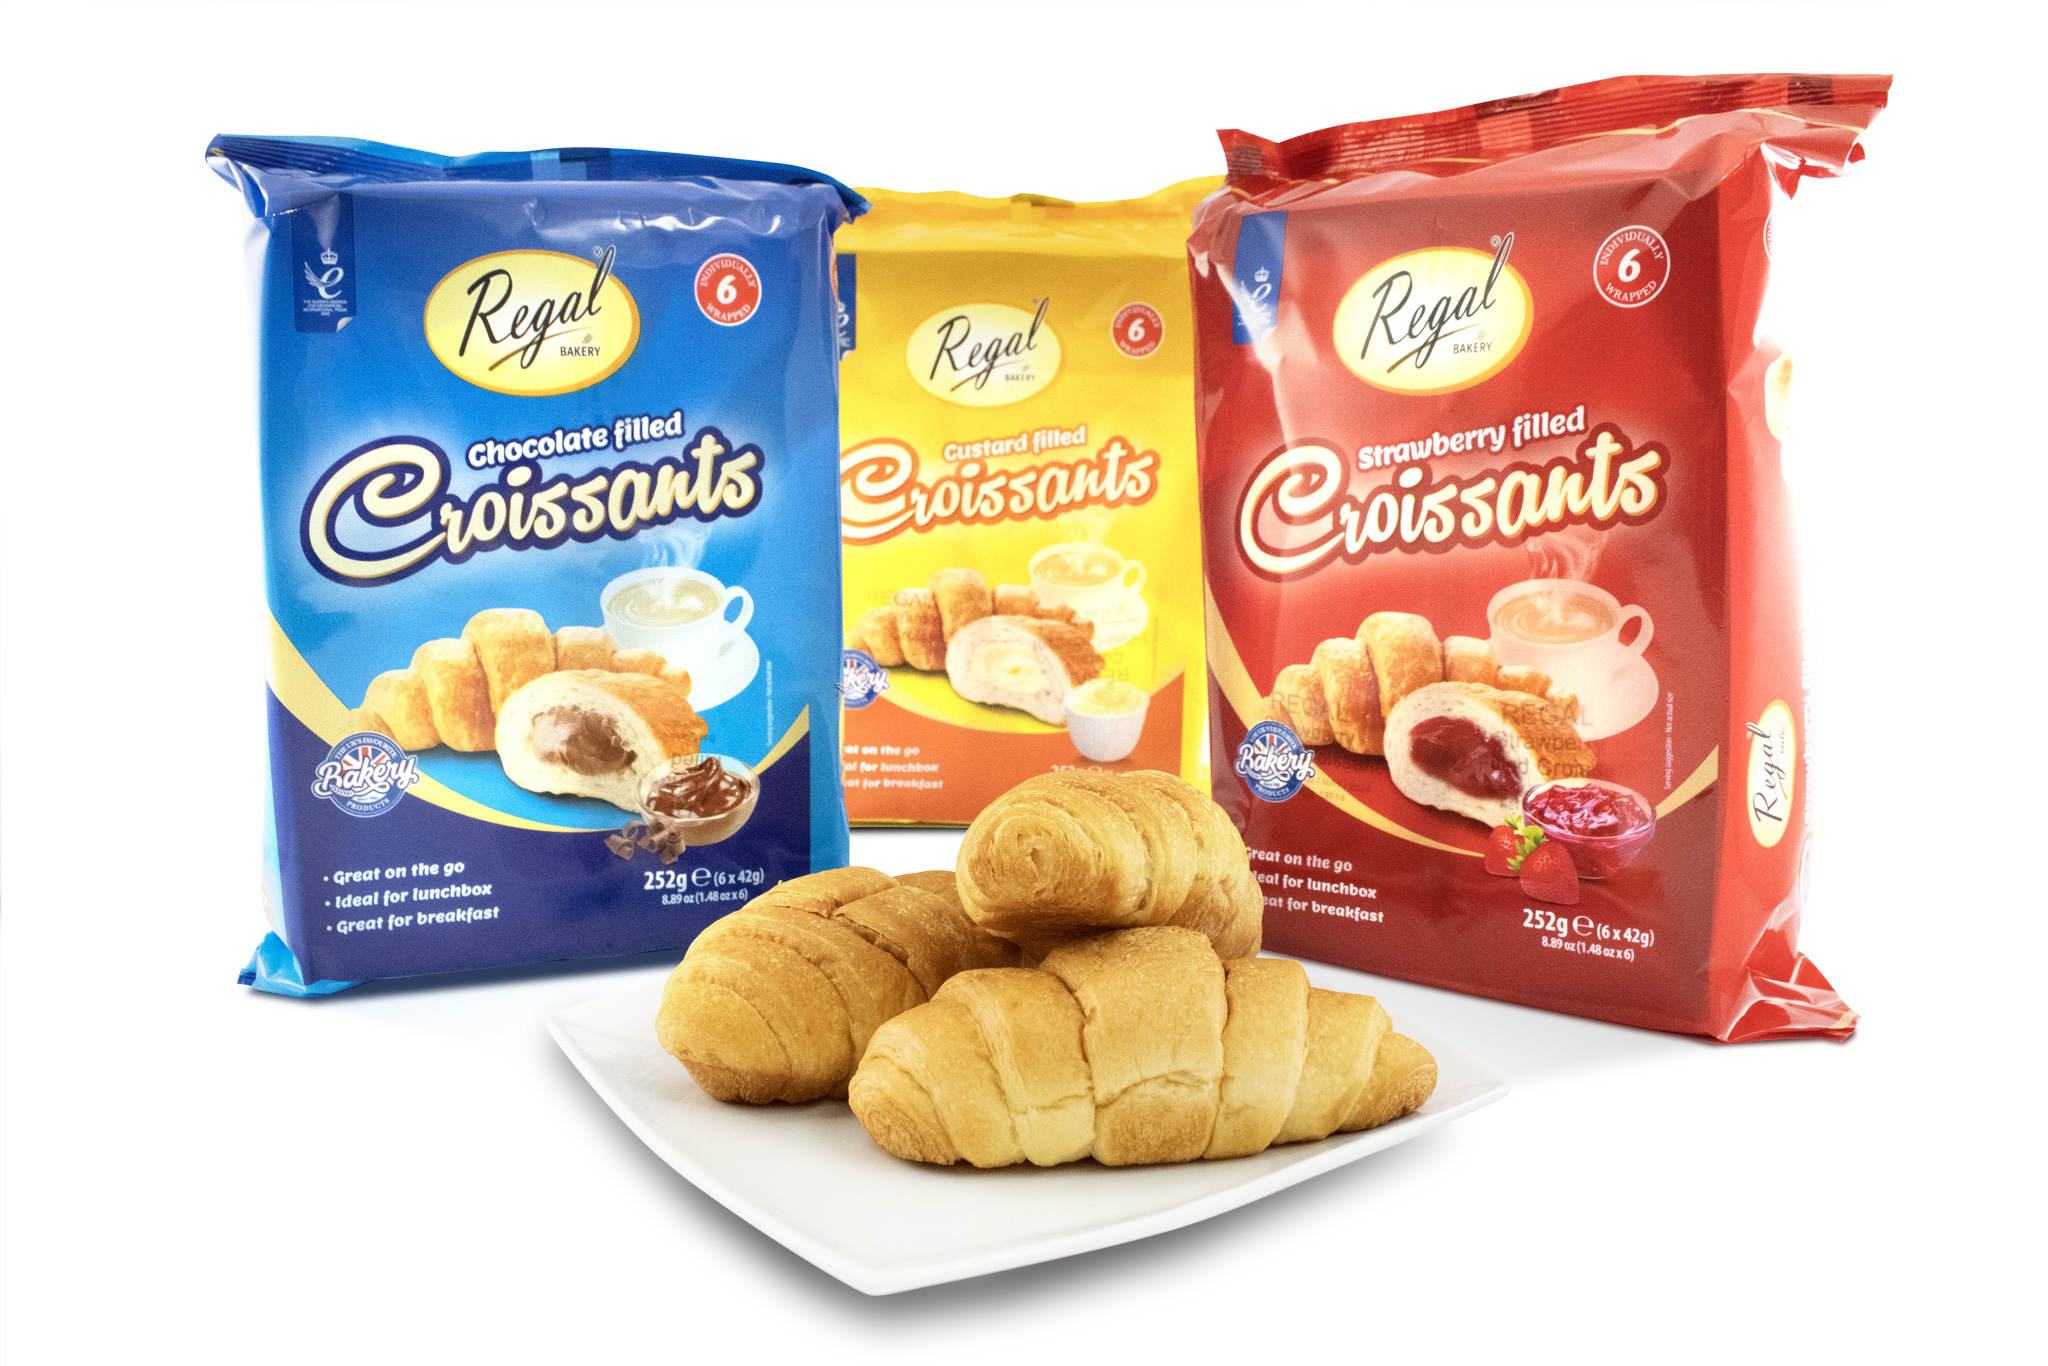 Making a comeback to Regal Bakery pastry portfolio, these deliciously filled croissants tick all the boxes making them an all-round customer favourite. They are great breakfast and perfect for the lunchbox and for on the go.